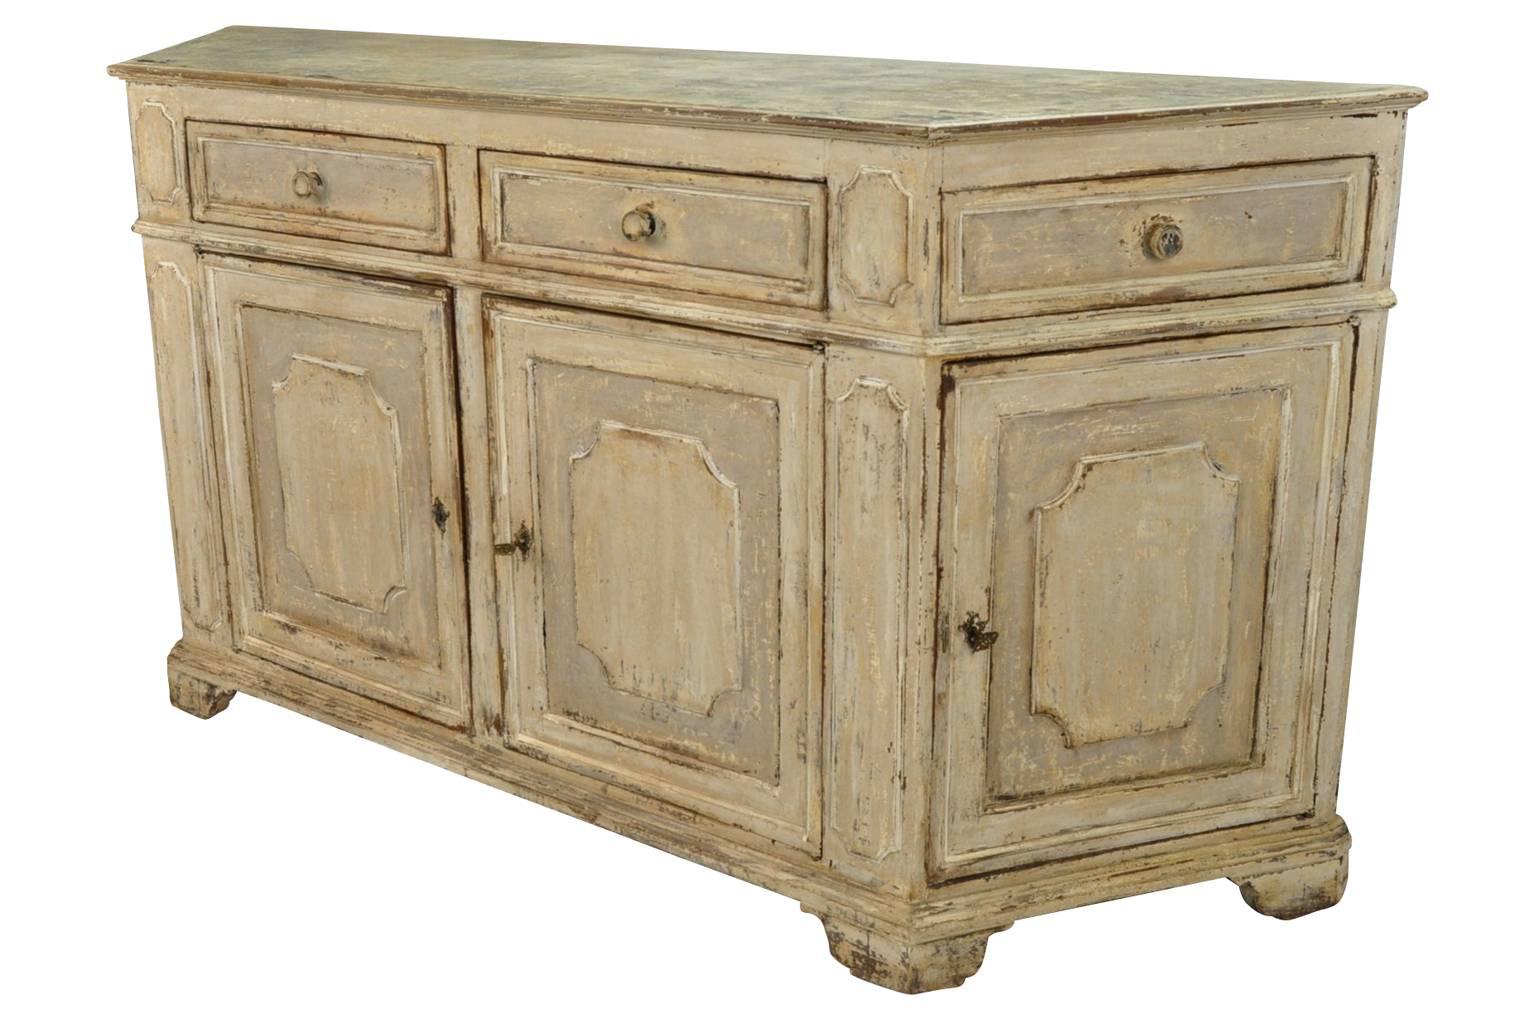 An outstanding late 18th-early 19th century credenza from Tuscany. Beautifully constructed with canted sides, four drawers and four doors. The patina and finish is wonderful. A terrific storage piece lending great style to any interior.